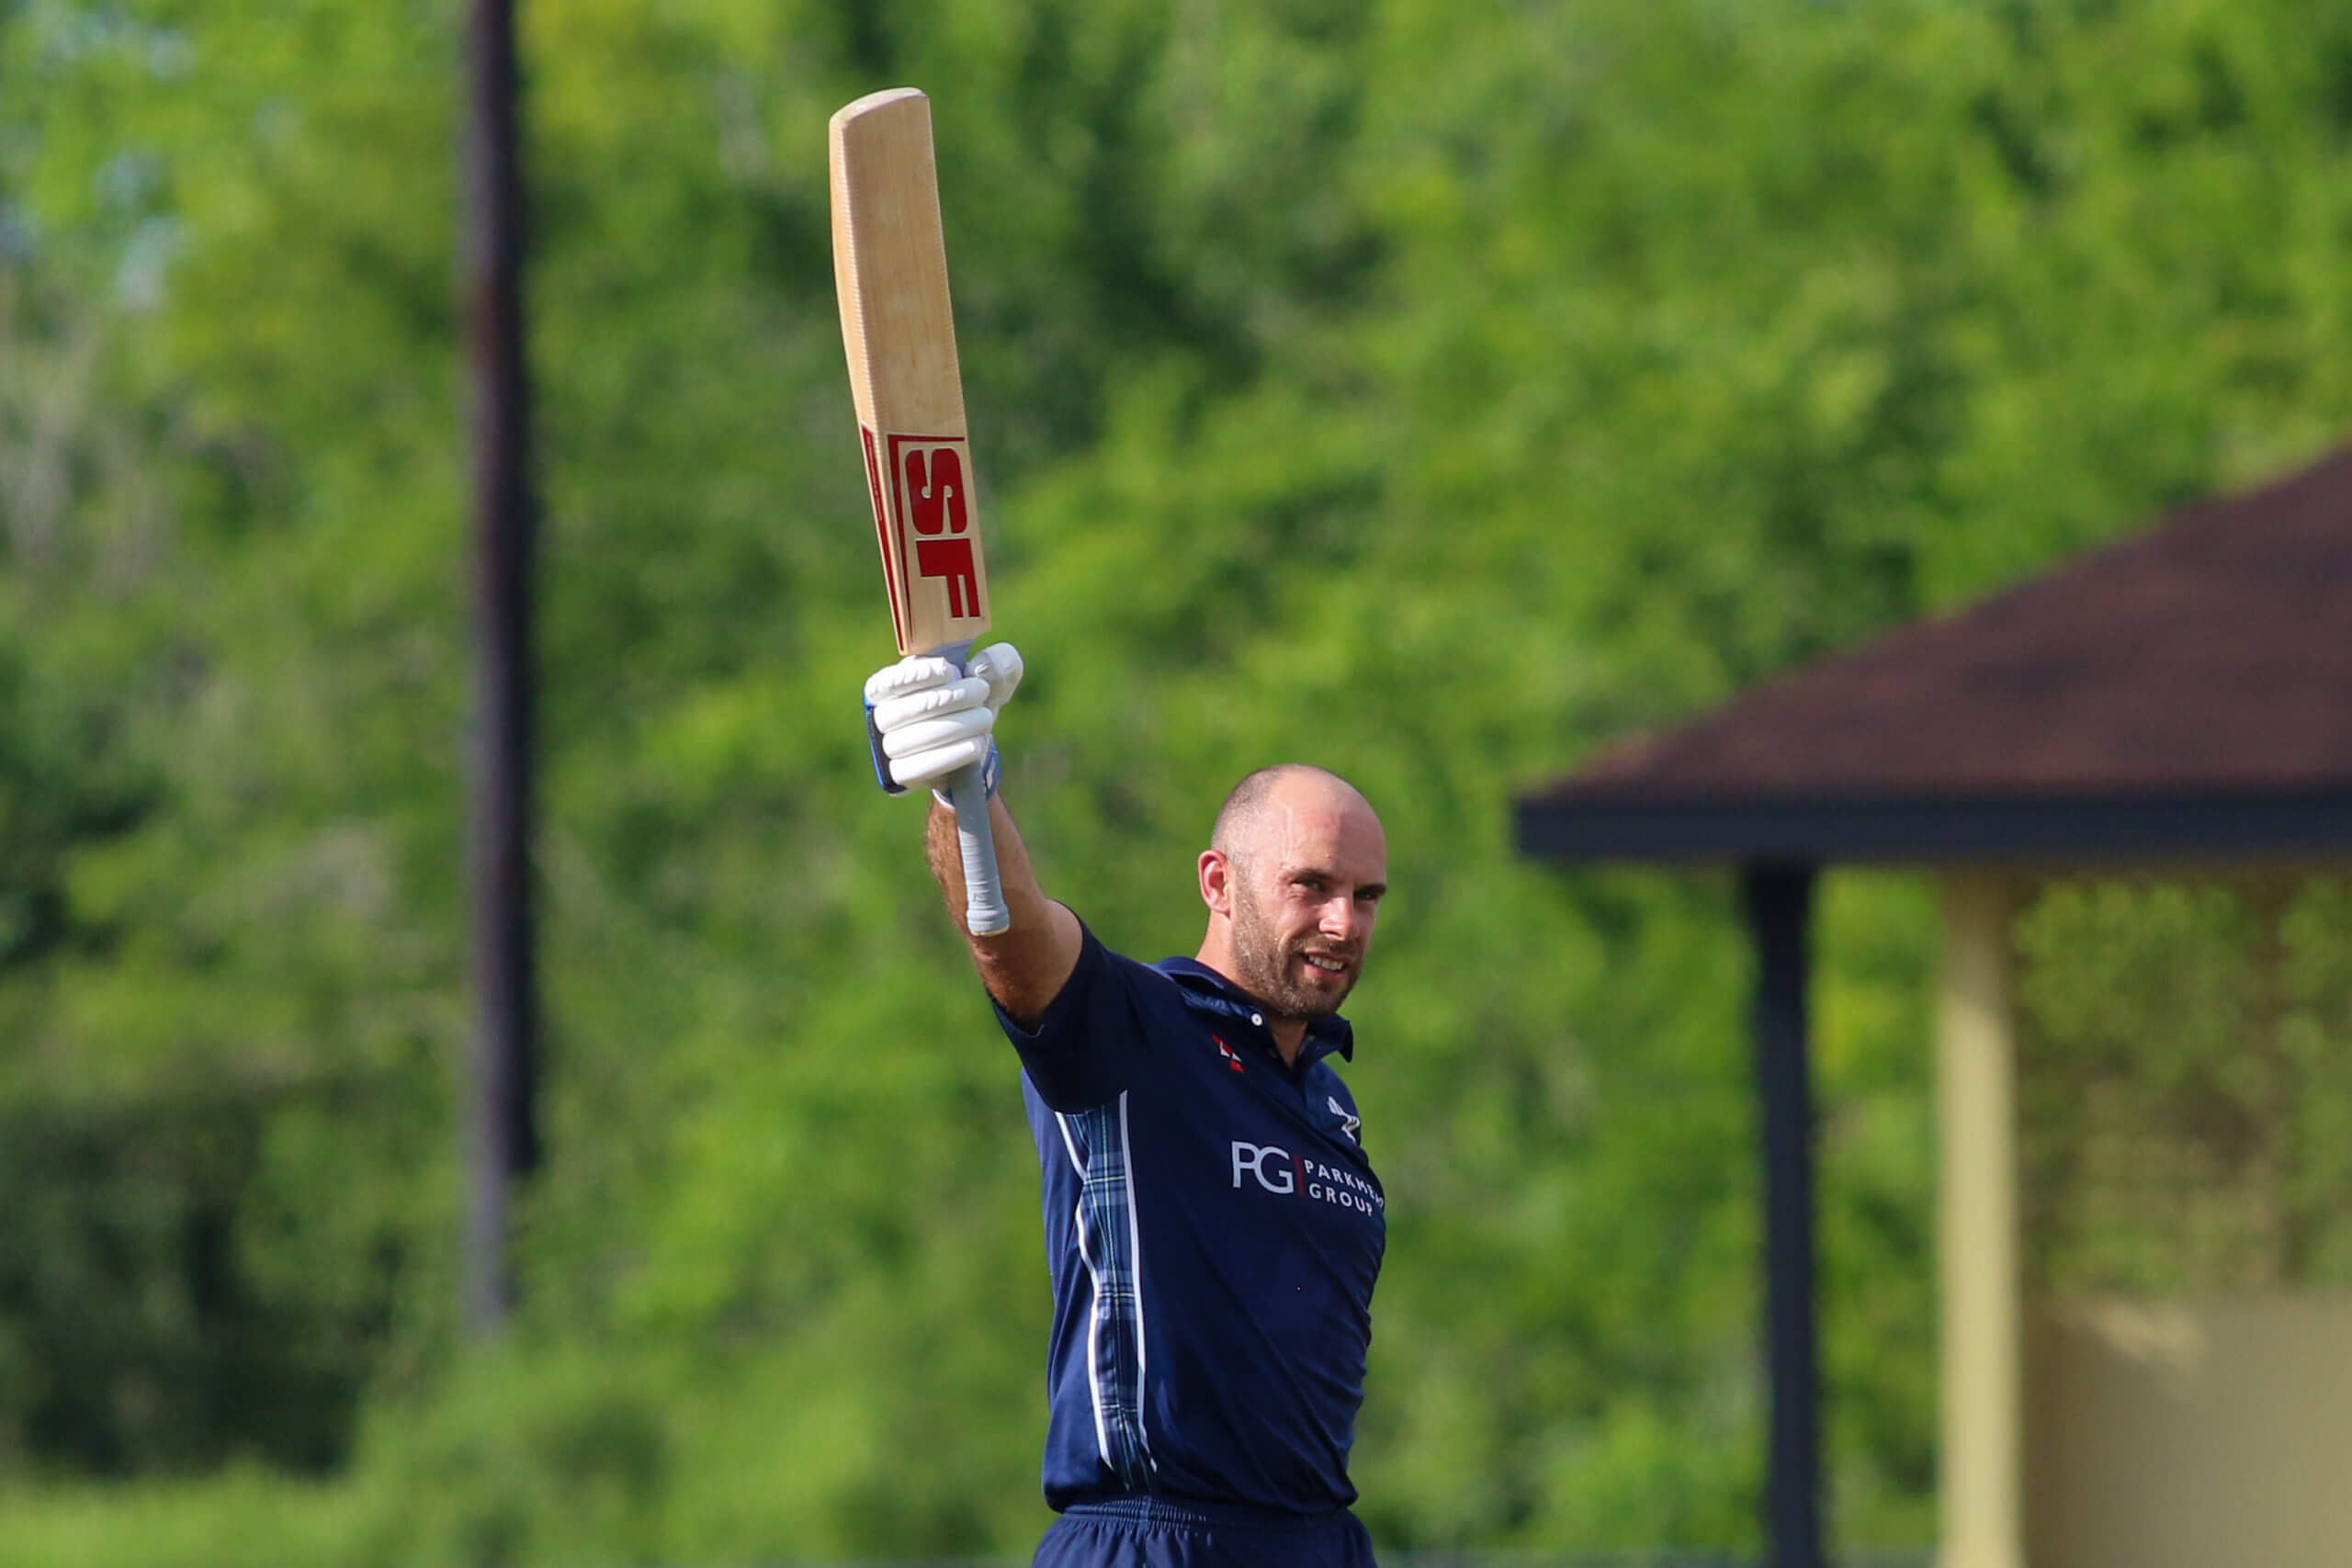 Former Scotland captain Kyle Coetzer and former New Zealand offspinner Will Somerville announce retirement